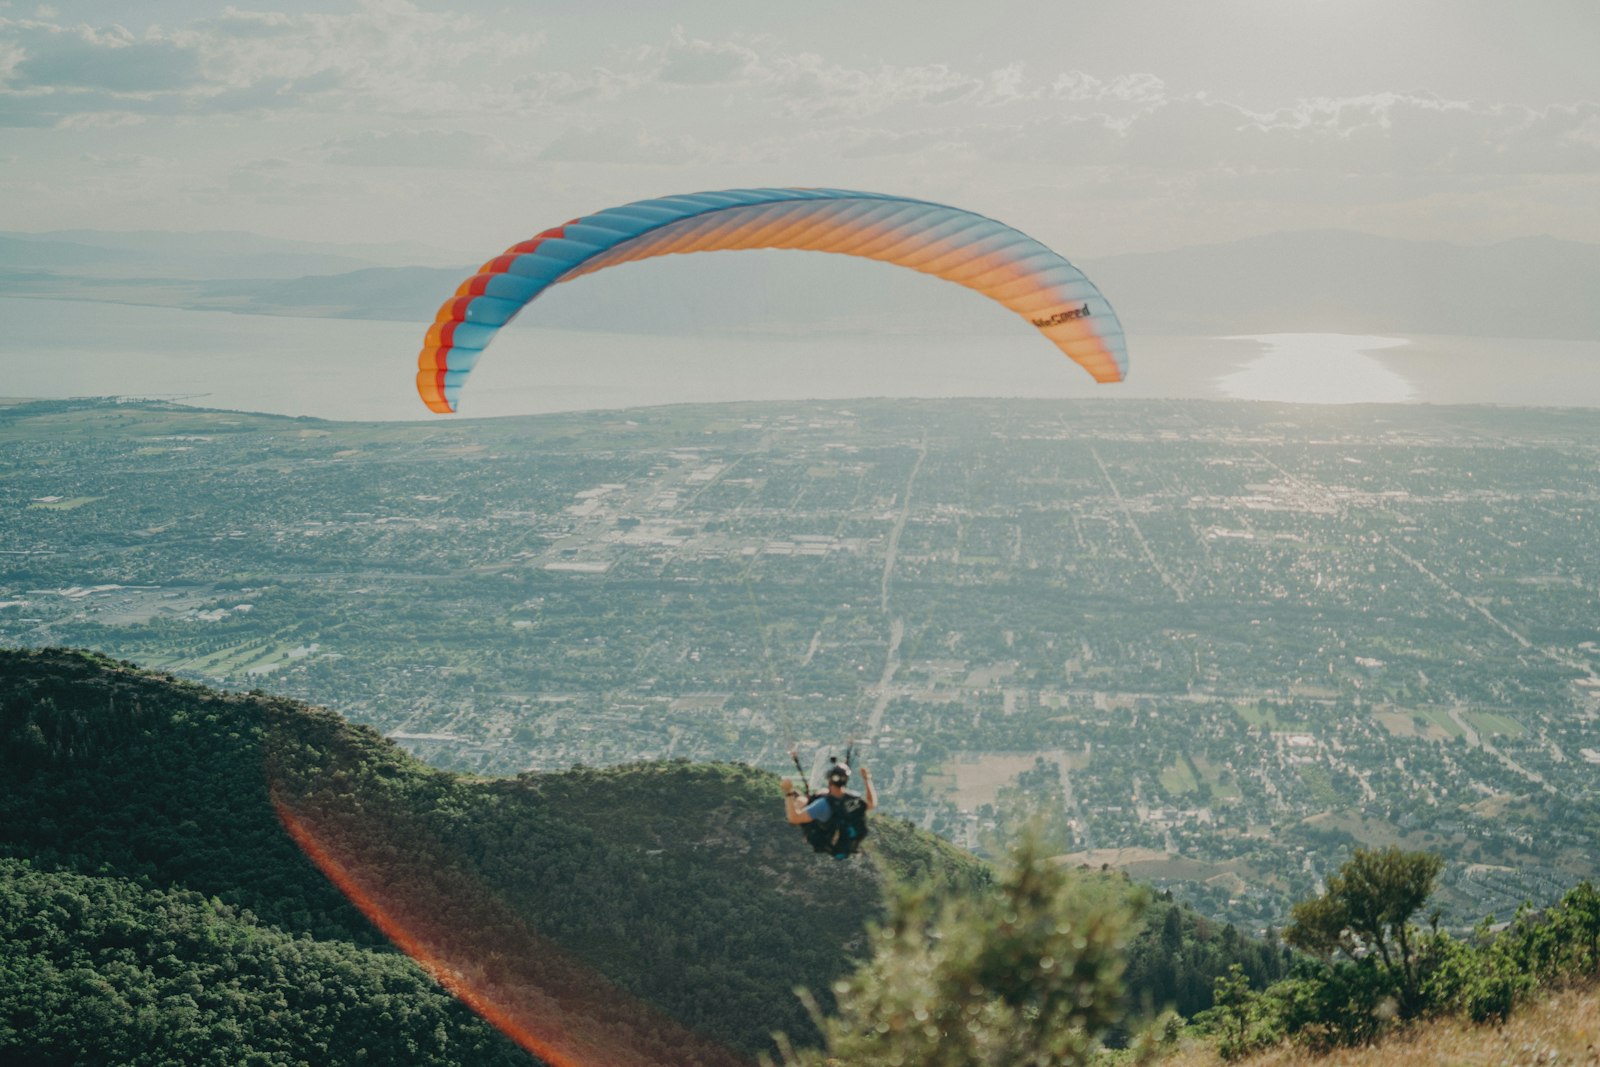 Sony a7R II sample photo. Man using parachute during photography